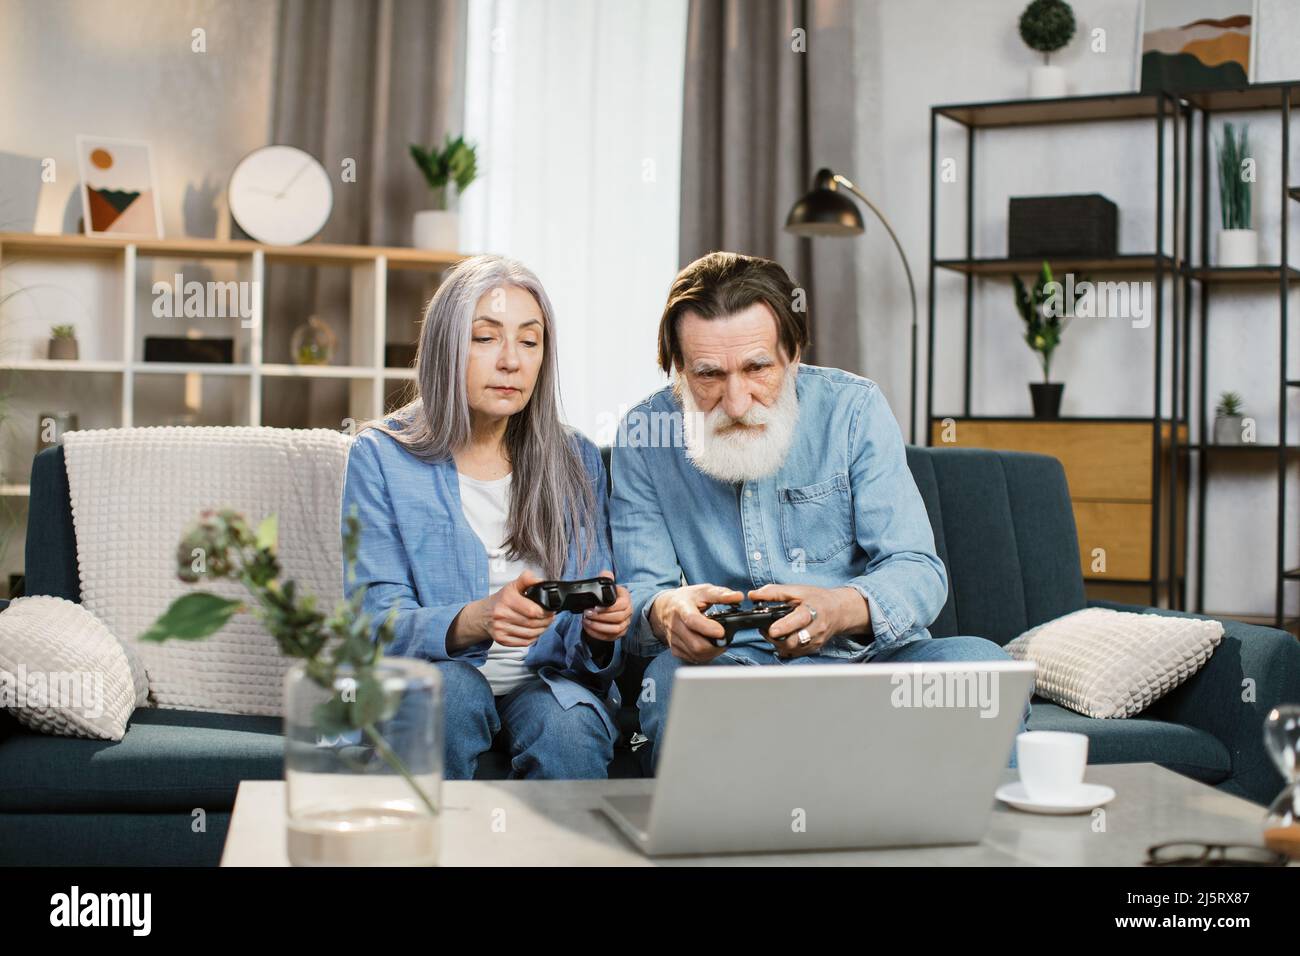 Joyful mature married couple with wireless joysticks in hands playing video games while sitting on comfy couch photo